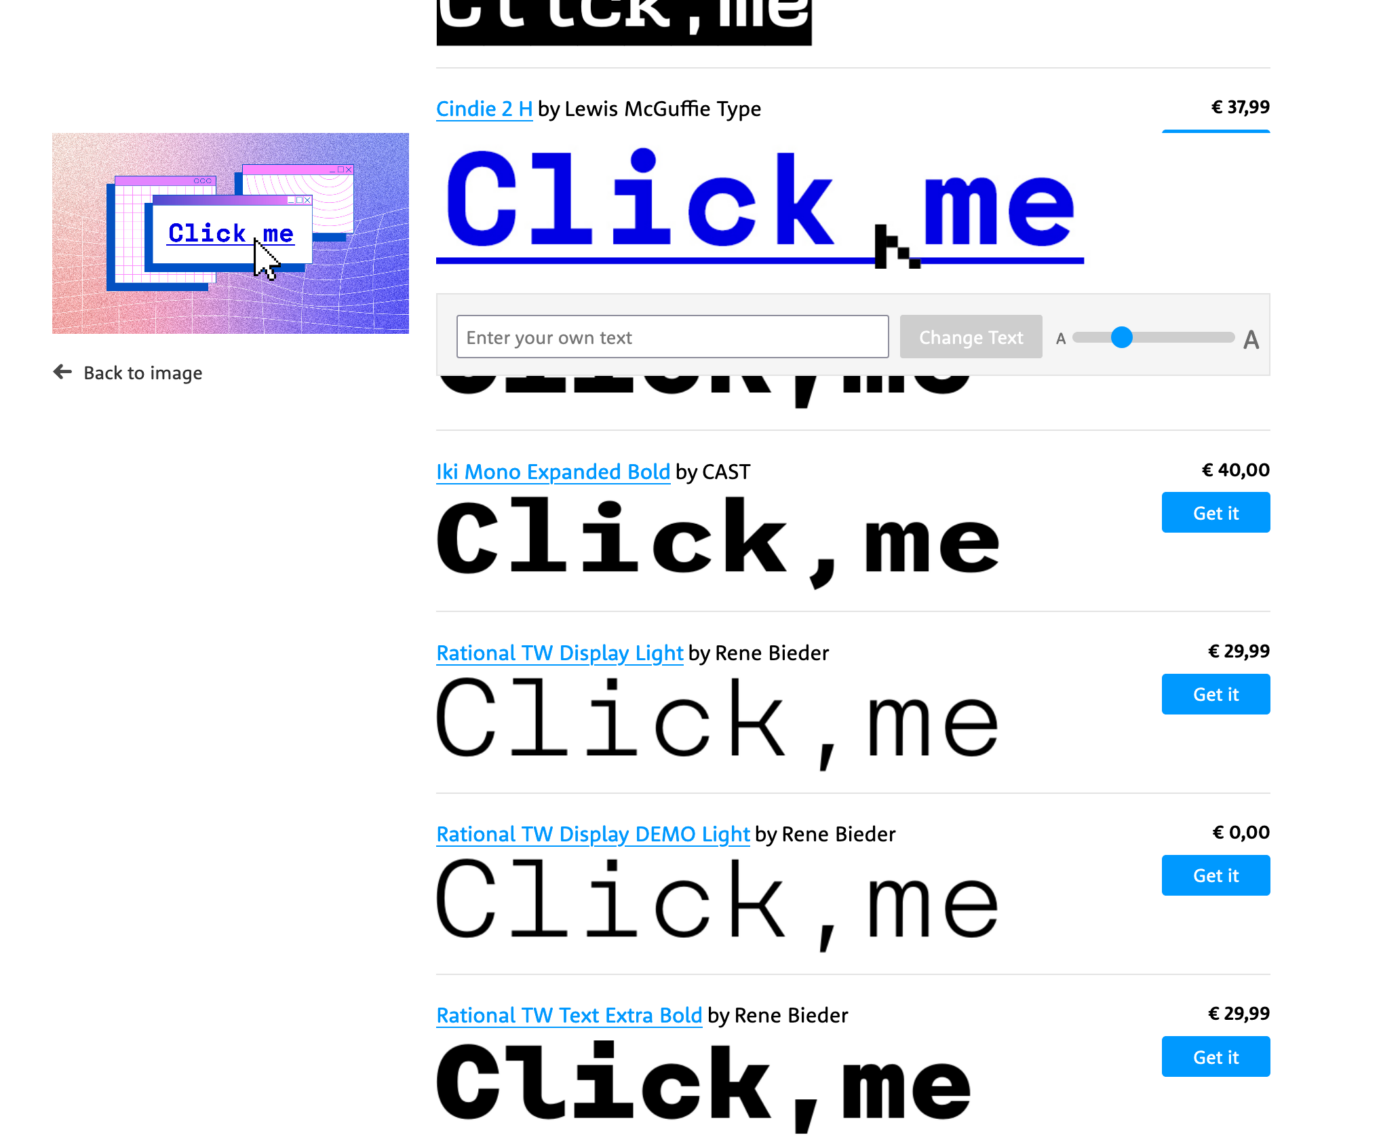 Results for the visual search of the monospace typeface used in a header graphic of an article with the word “click me“.